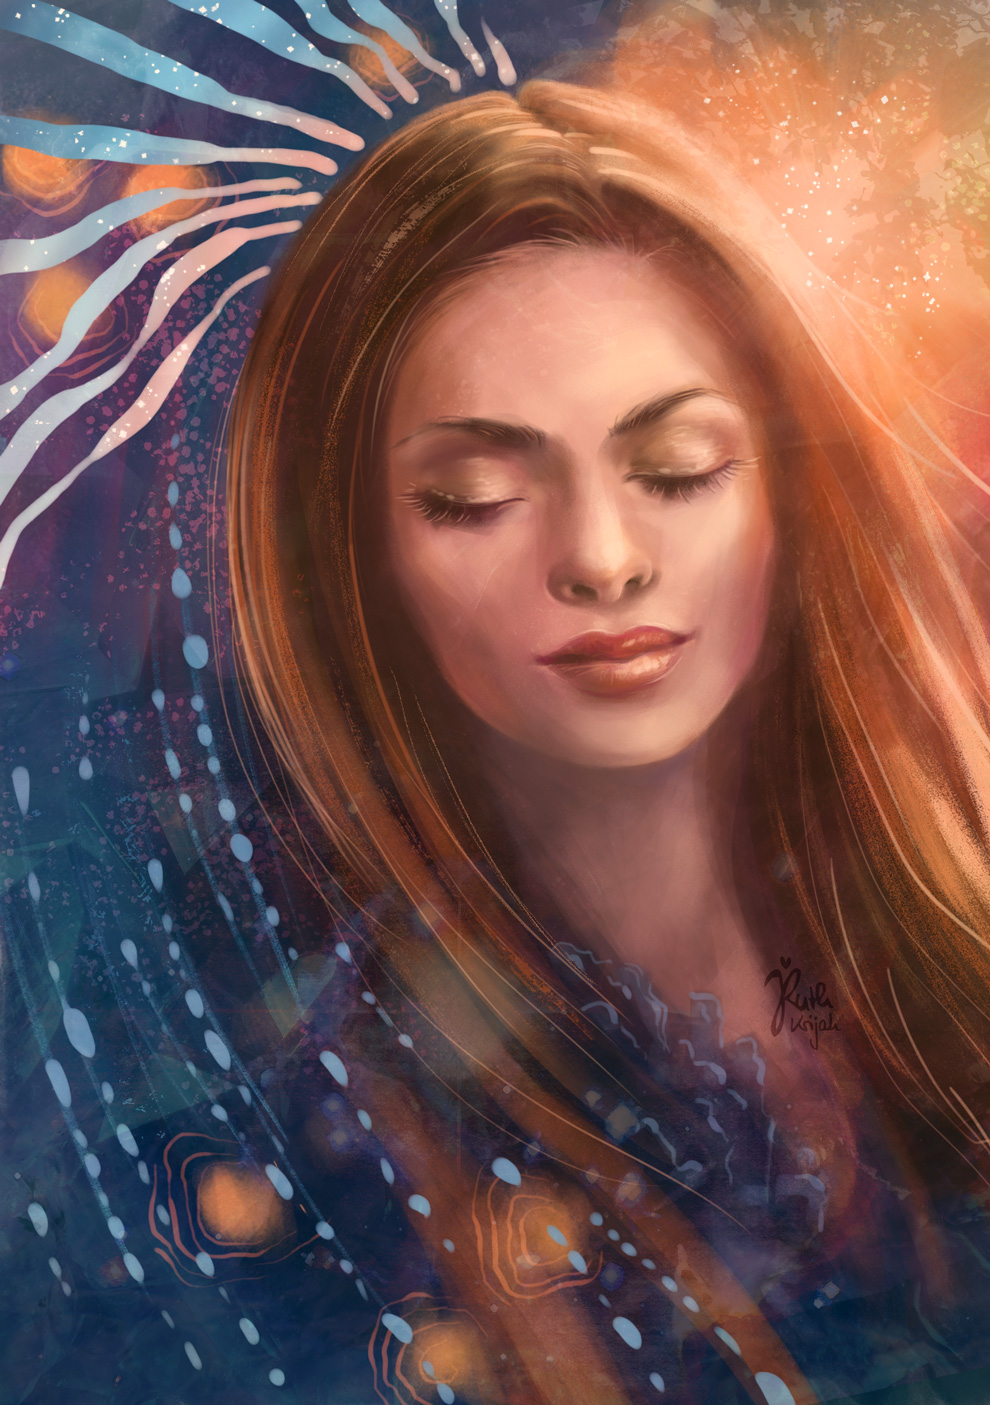 Digital Portrait of a Woman closed eyes. Crystal clarity. Inner Peace and Serenity. Inner Woman Portrait. By Artist Ruth Krijah - inspired by and created for patrons at patreon.com/ruthkrijah